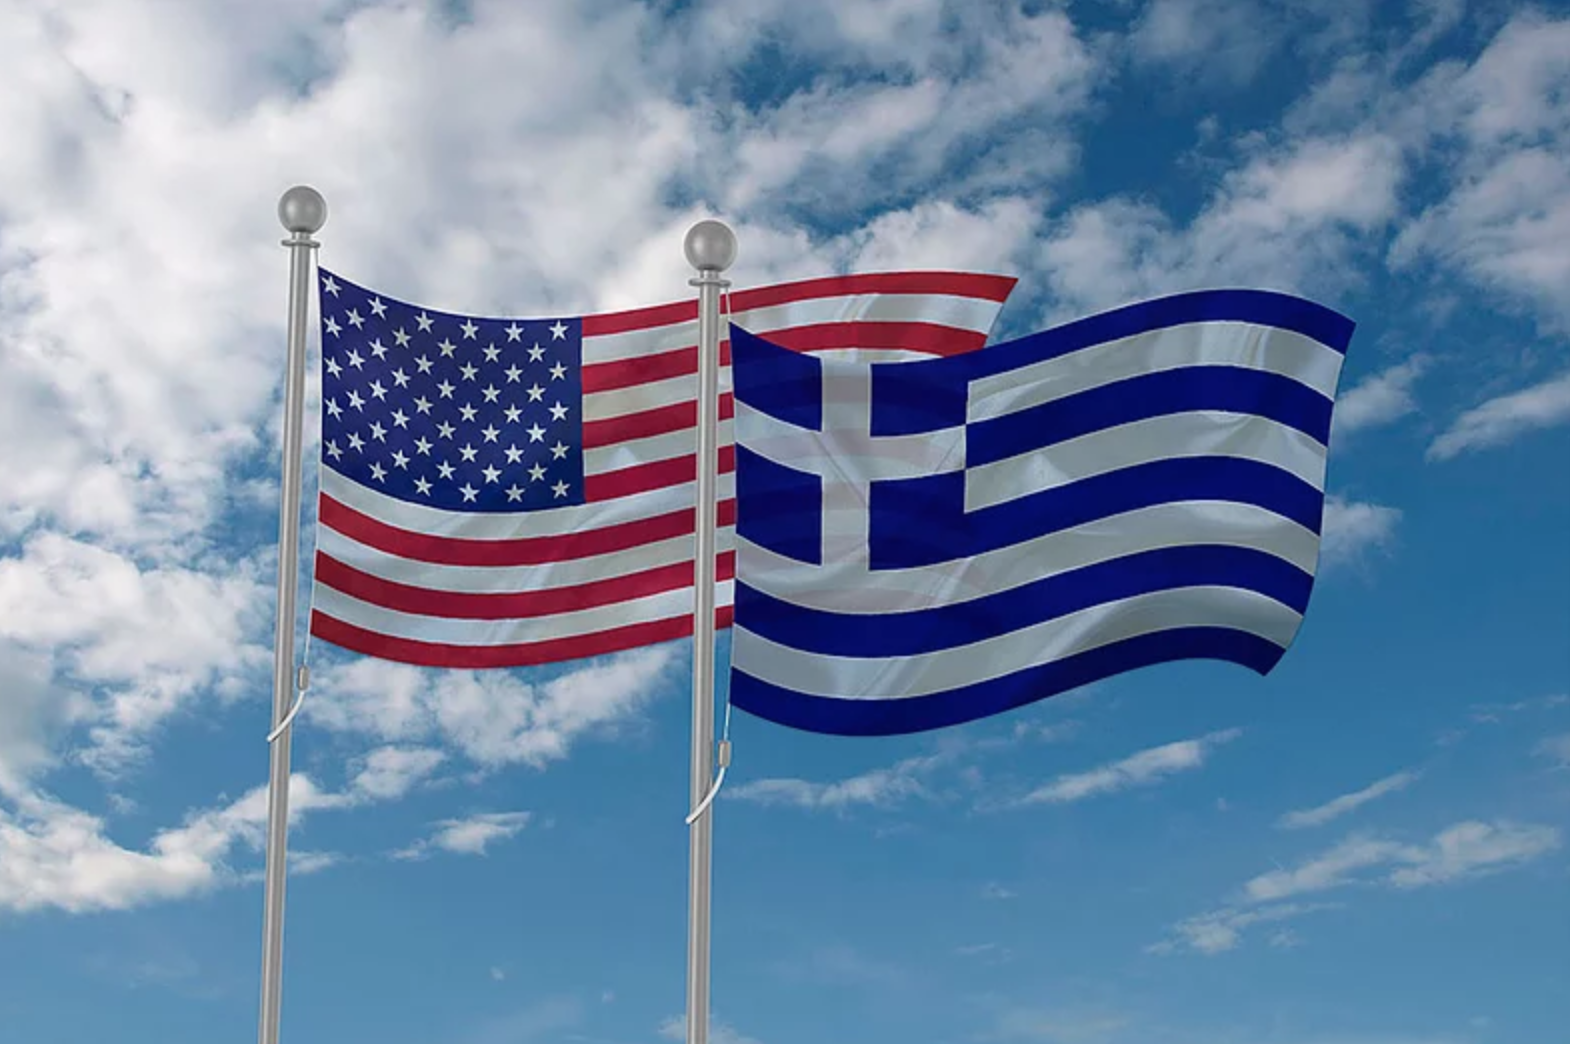 Congress Applauded for its Support for U.S.-Greece Relations; Service Programs Vital to AHEPA’s Mission